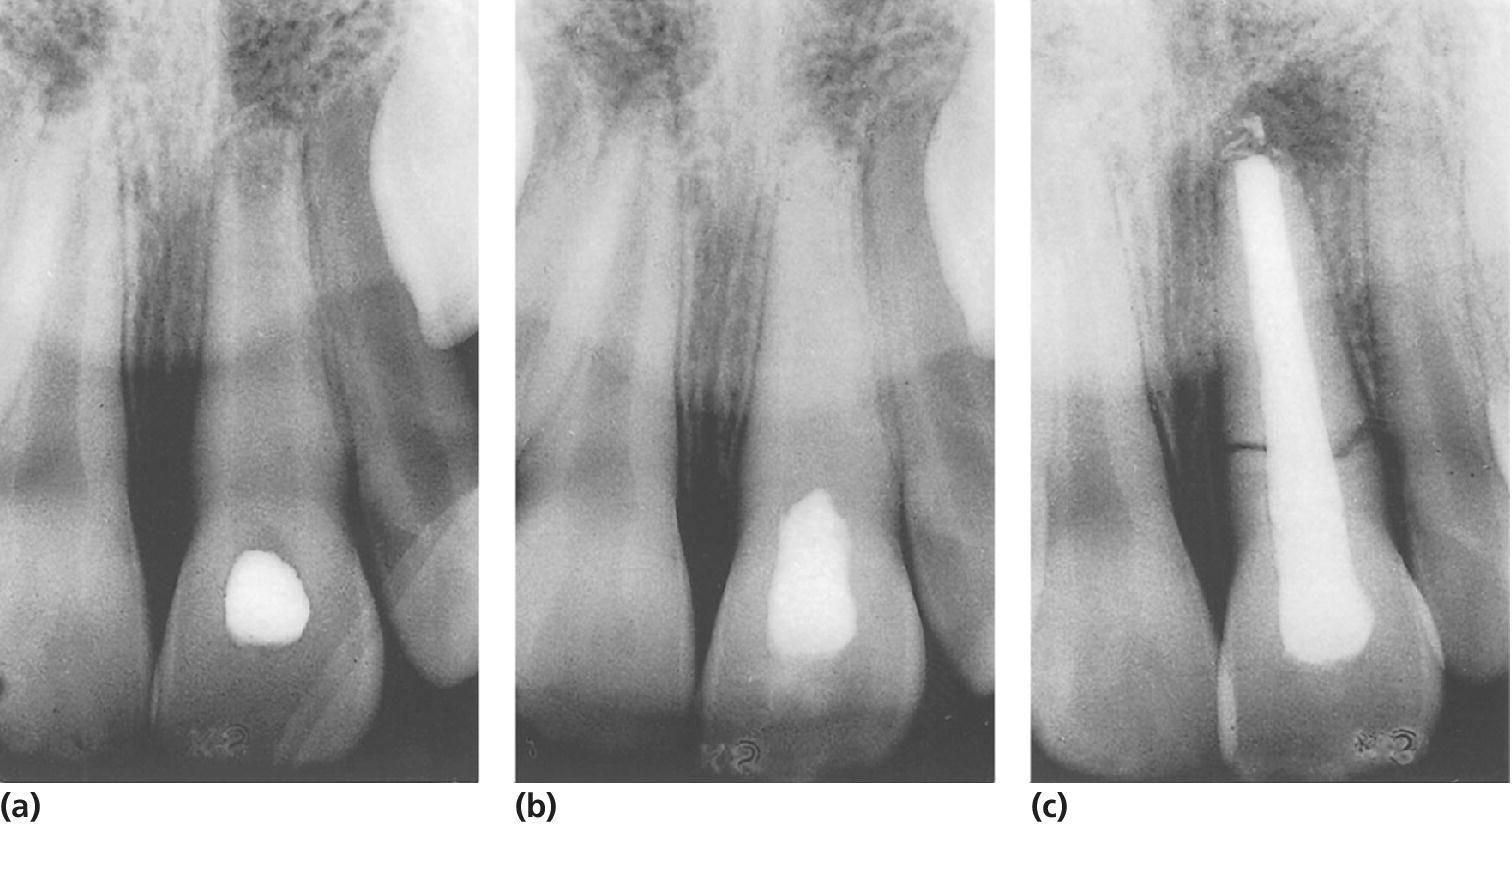 3 Radiographs of spontaneous root fracture of nonvital immature central incisor during long‐term treatment with calcium hydroxide (a, b) and fracture observed 1 year after completed endodontic treatment (c).